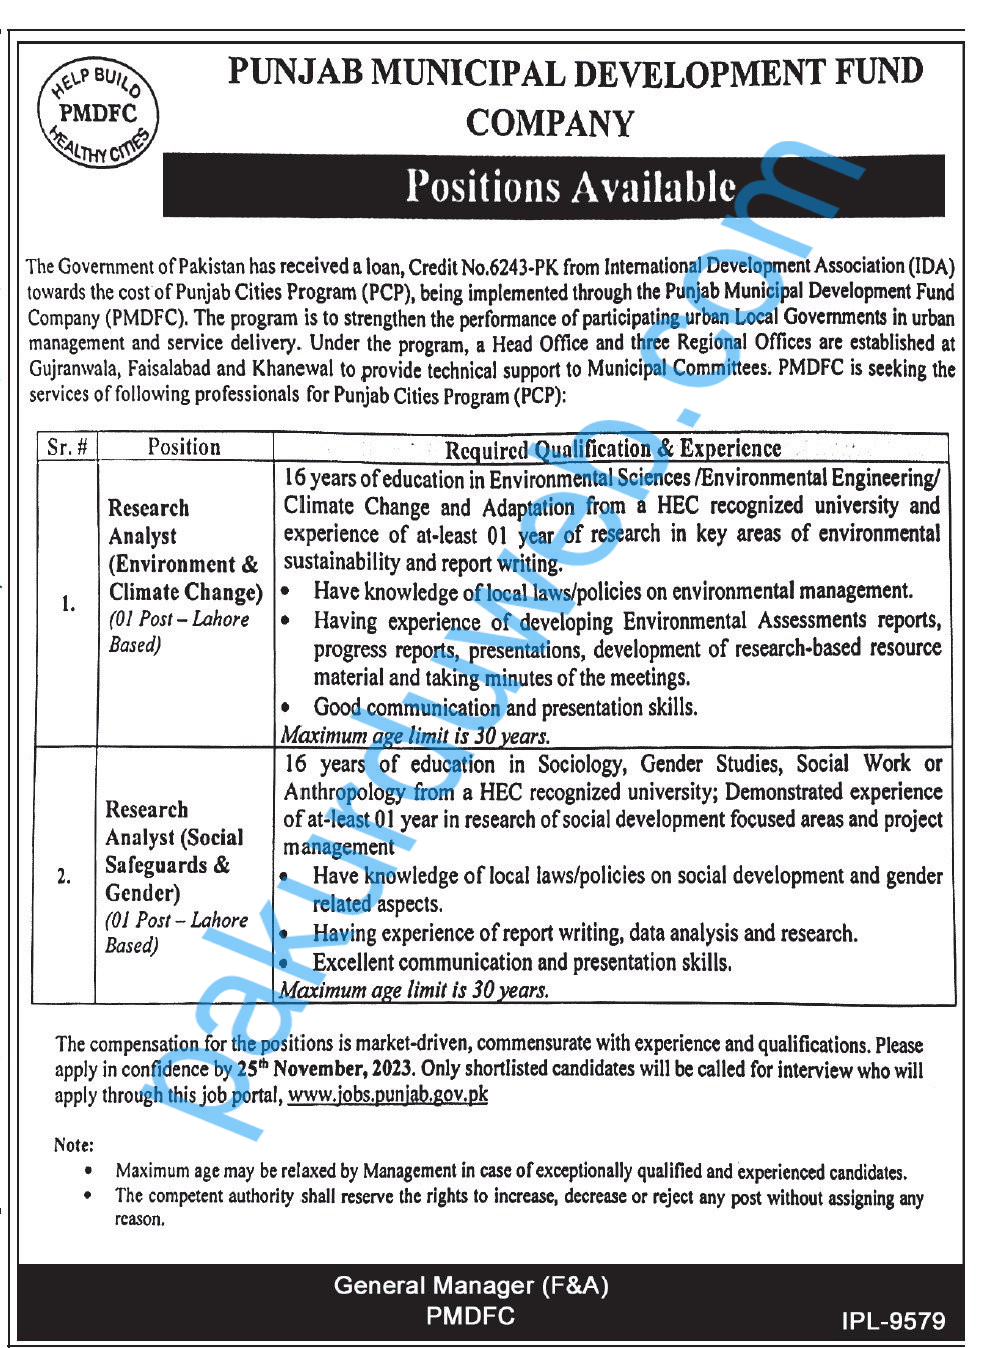 PMDFC Jobs, Research Analyst Positions at Municipal Development Fund Company (PMDFC), Pakistan 2023.